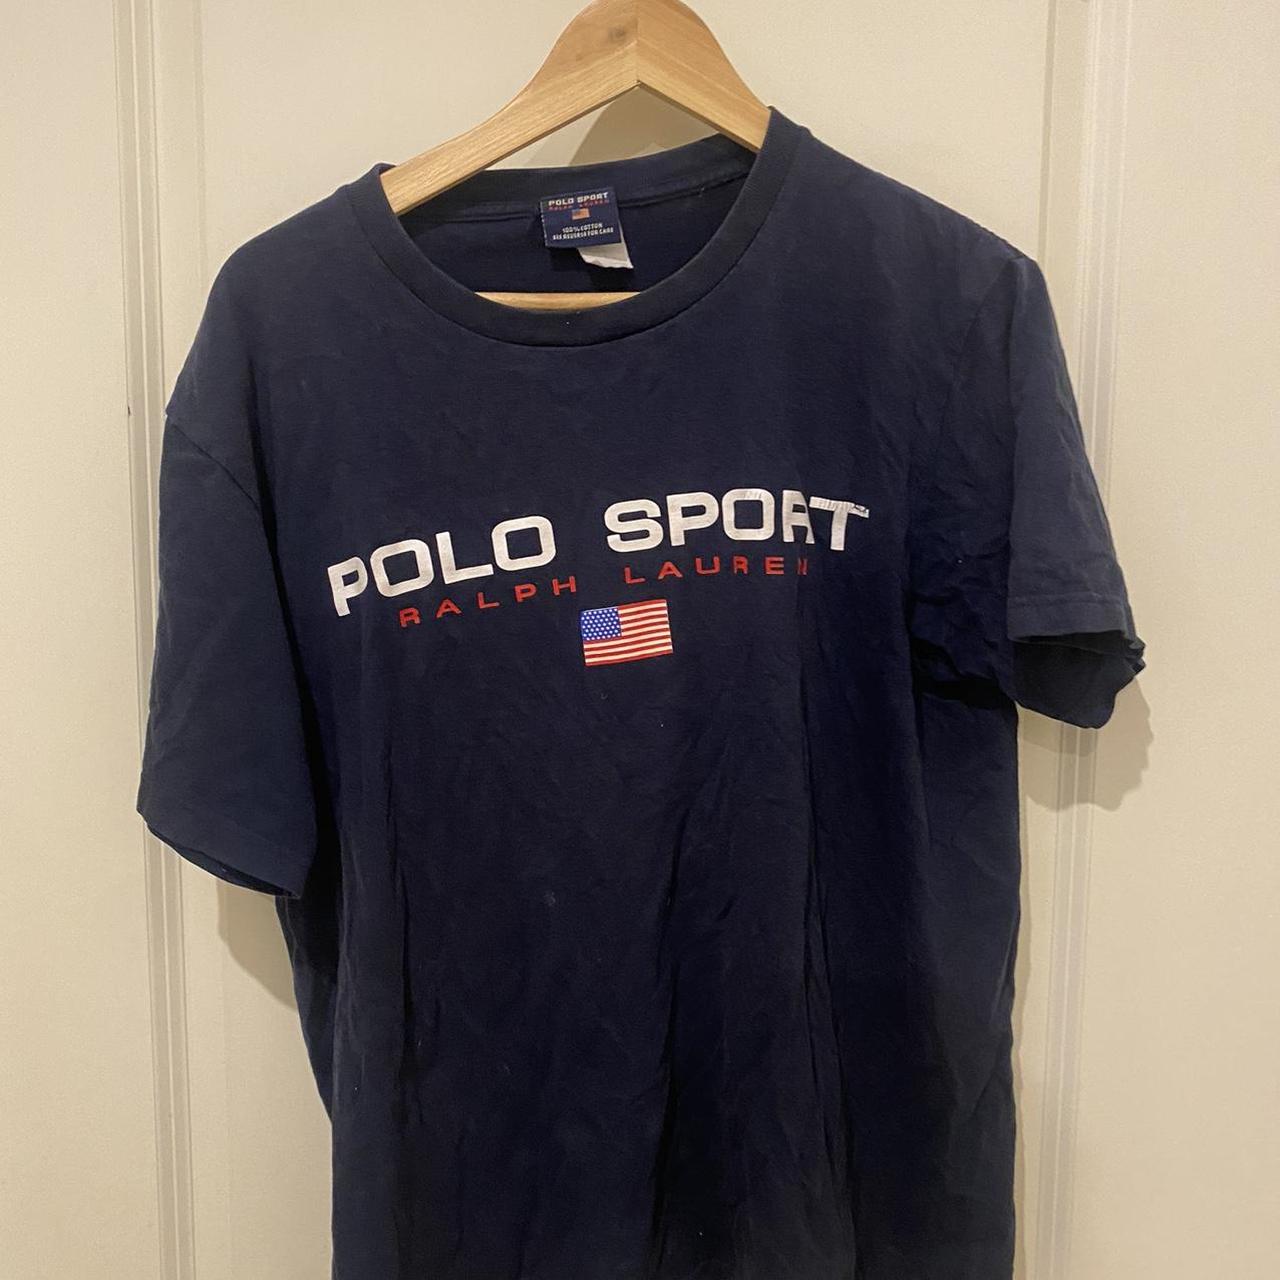 Polo sport Ralph Lauren tee Tagged size L but fits... - Depop